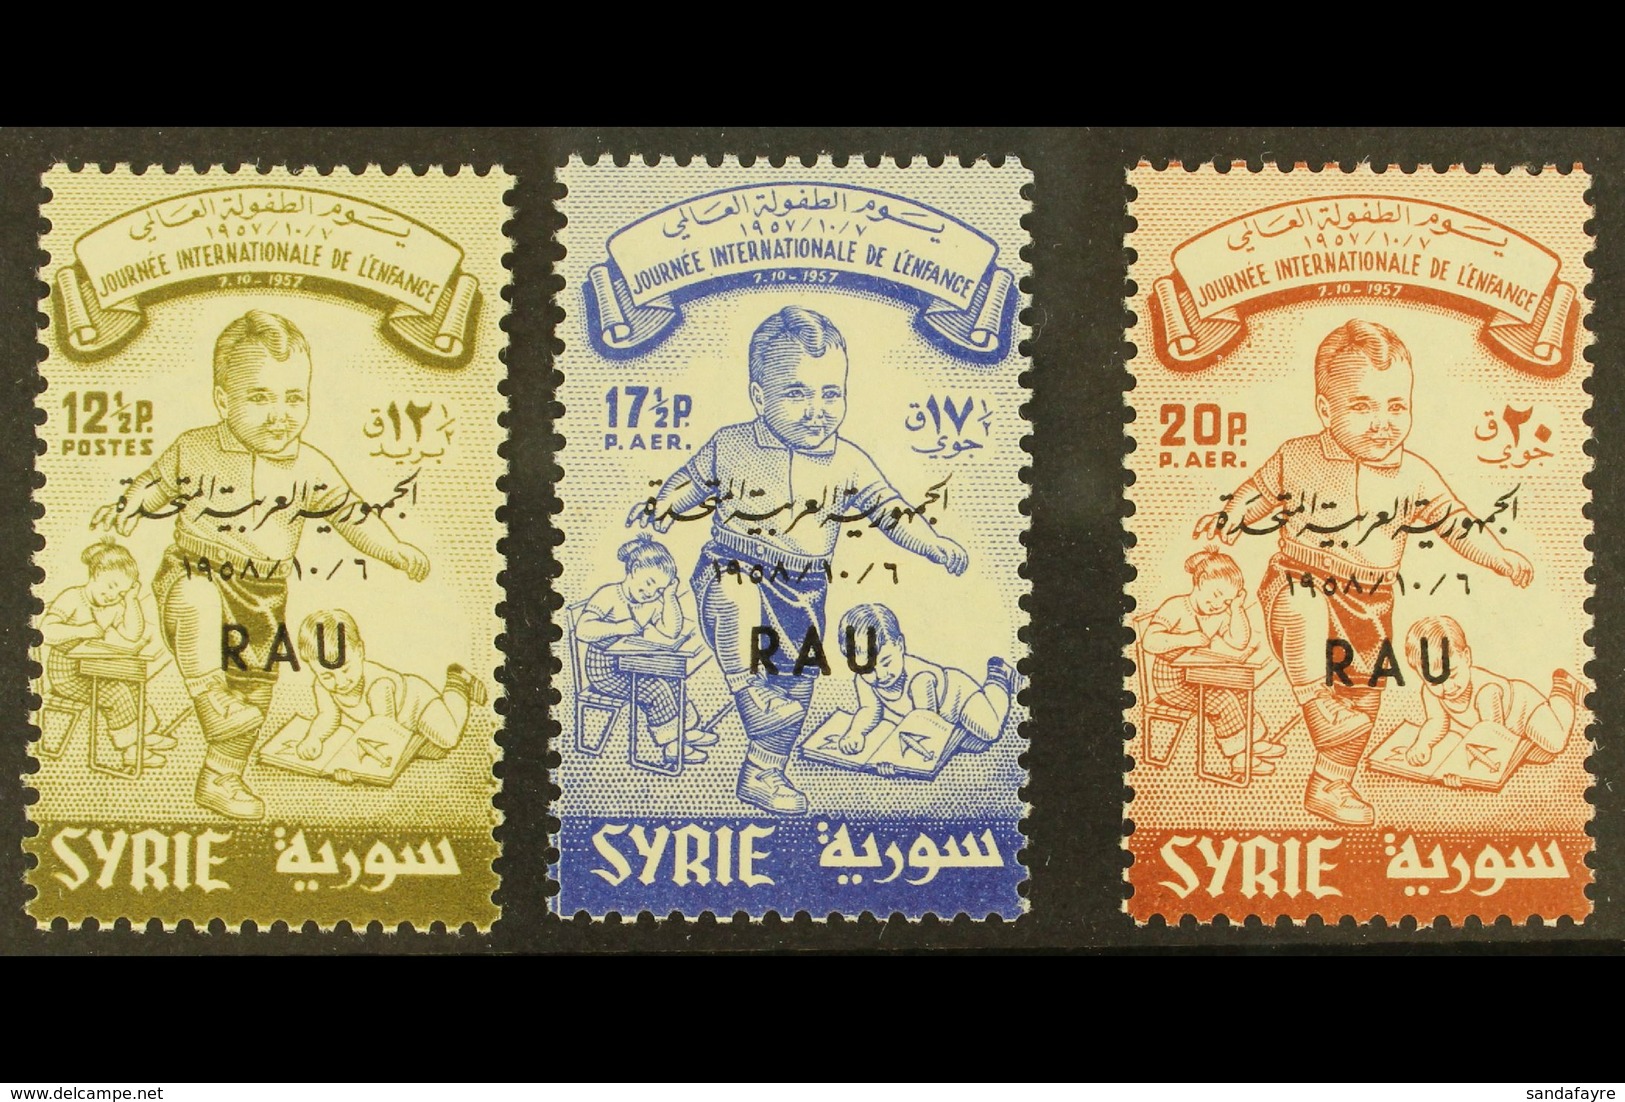 1958 International Children's Day "RAU" Overprints Complete Set, SG 670a/70c, Fine Never Hinged Mint, Fresh. (3 Stamps)  - Syrie